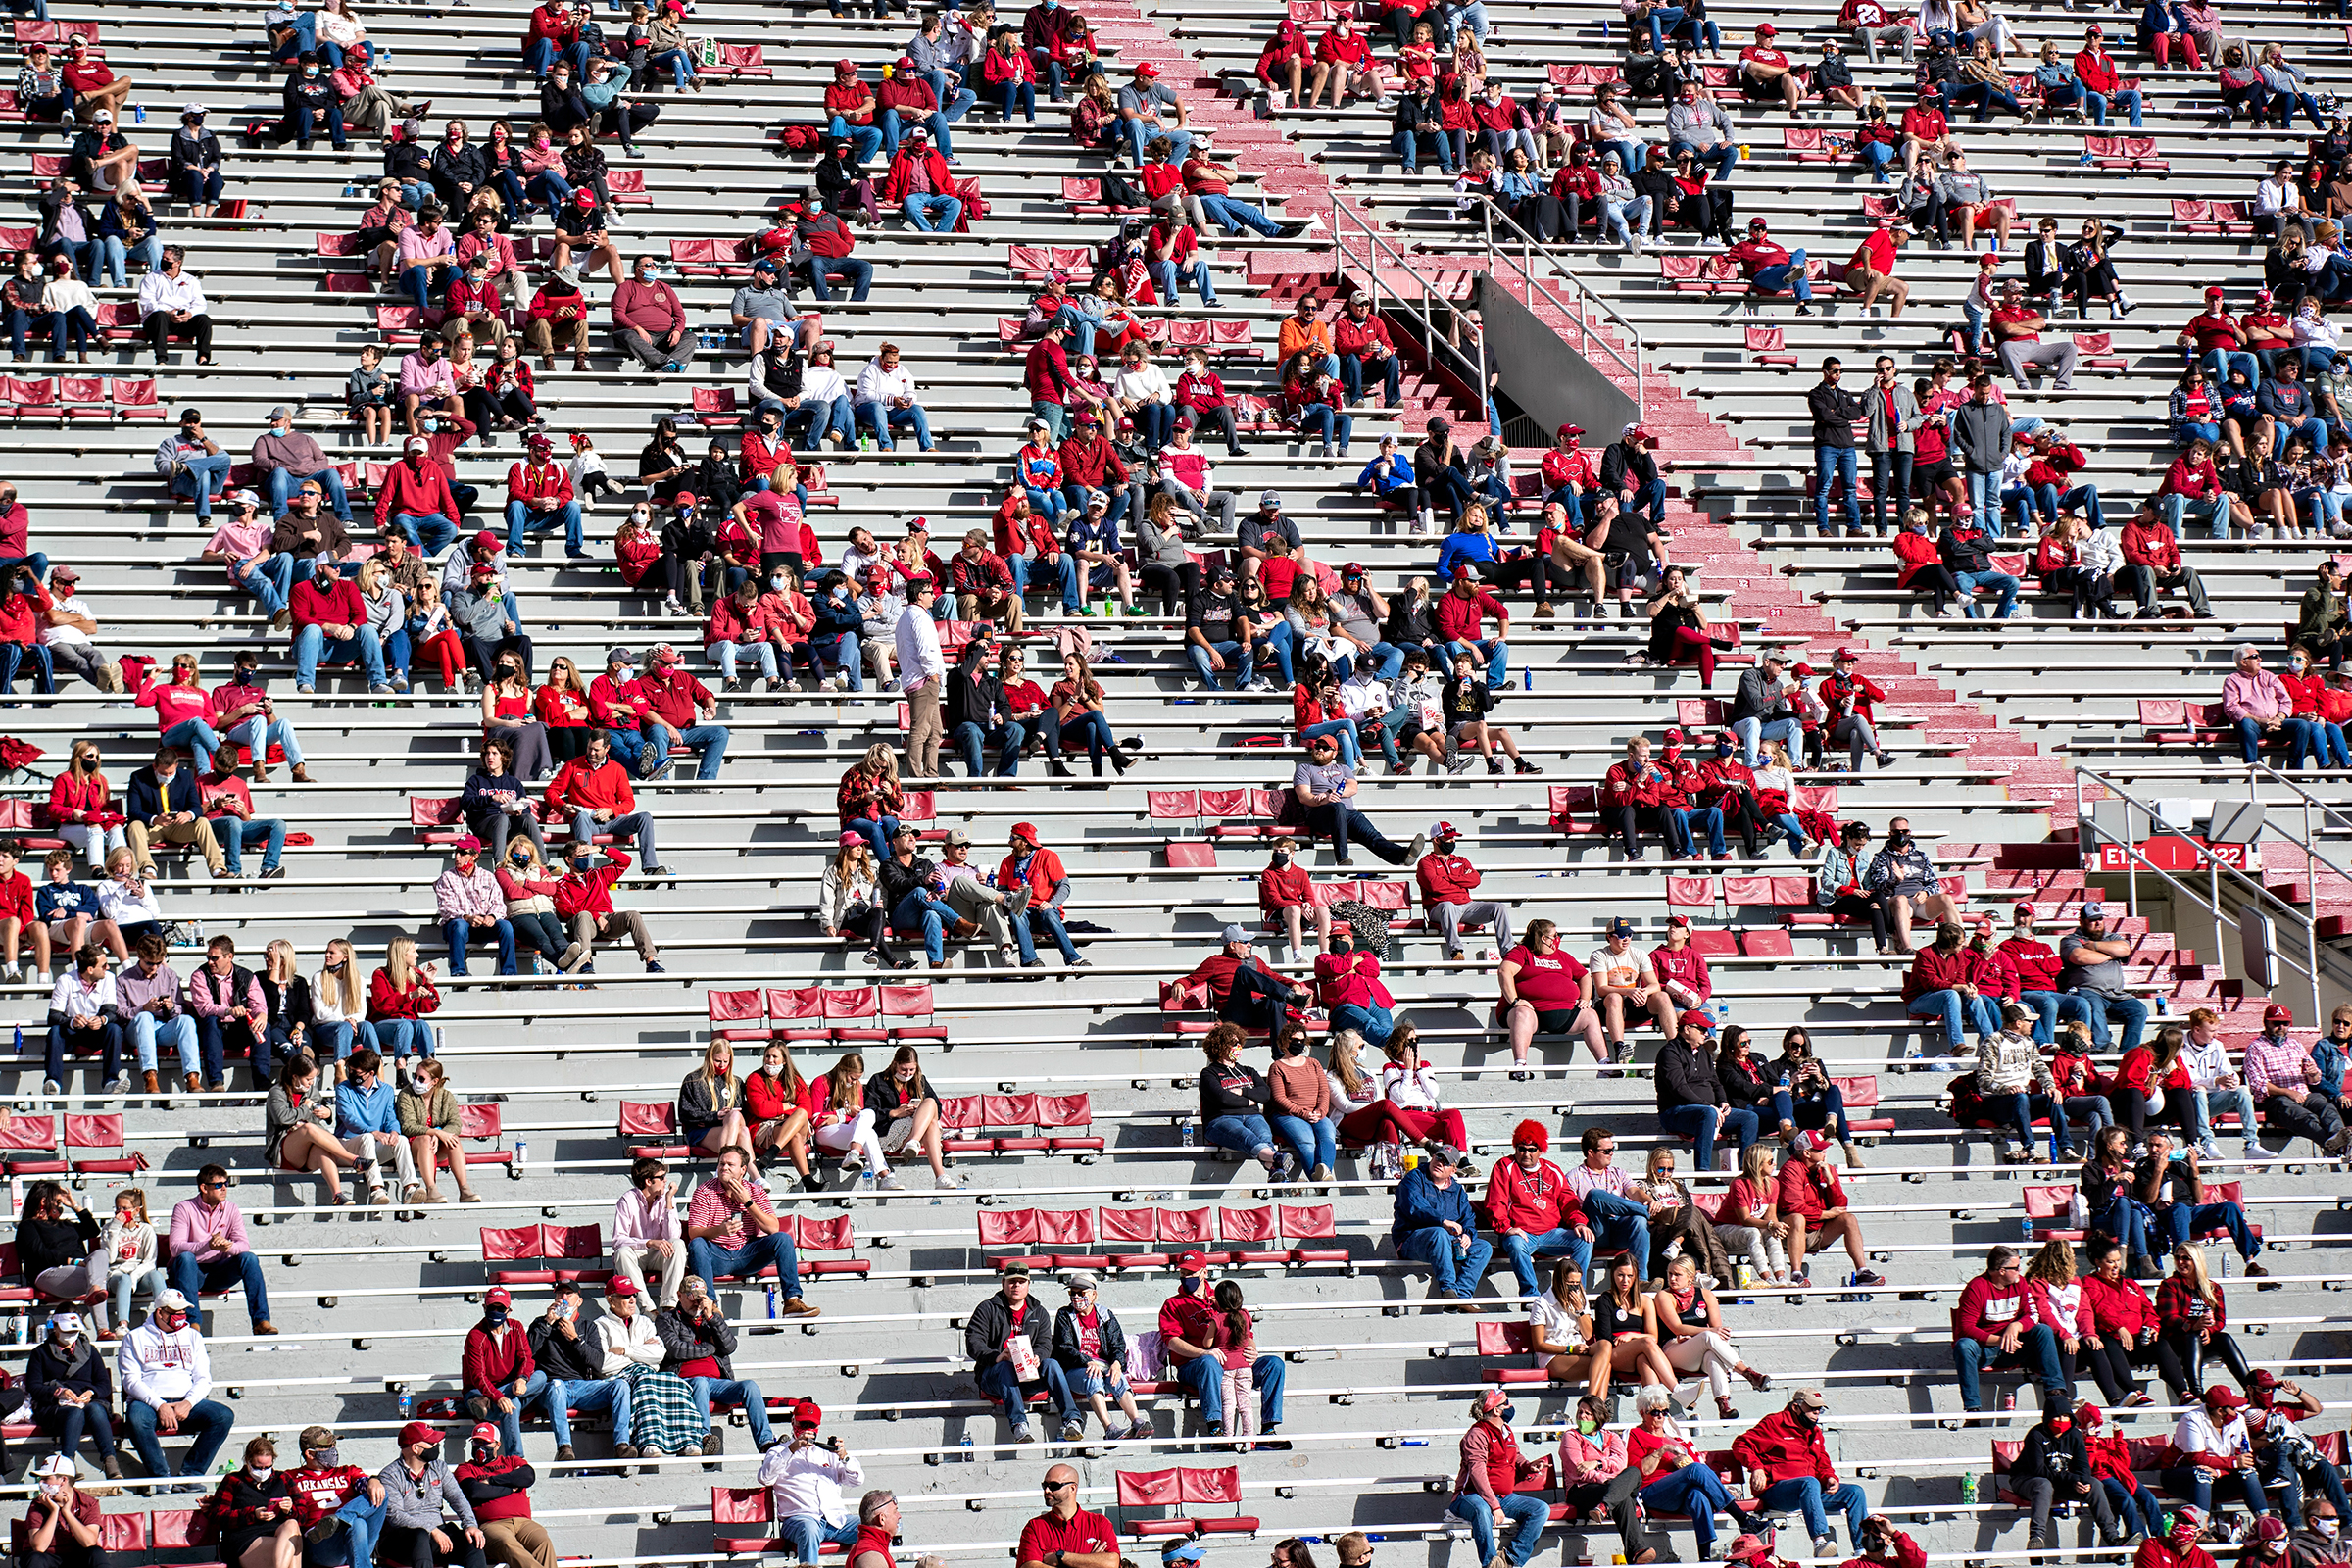 Socially distanced groups of fans during a game between the Arkansas Razorbacks and the Mississippi Rebels in Fayetteville, Ark., on Oct. 17, 2020.